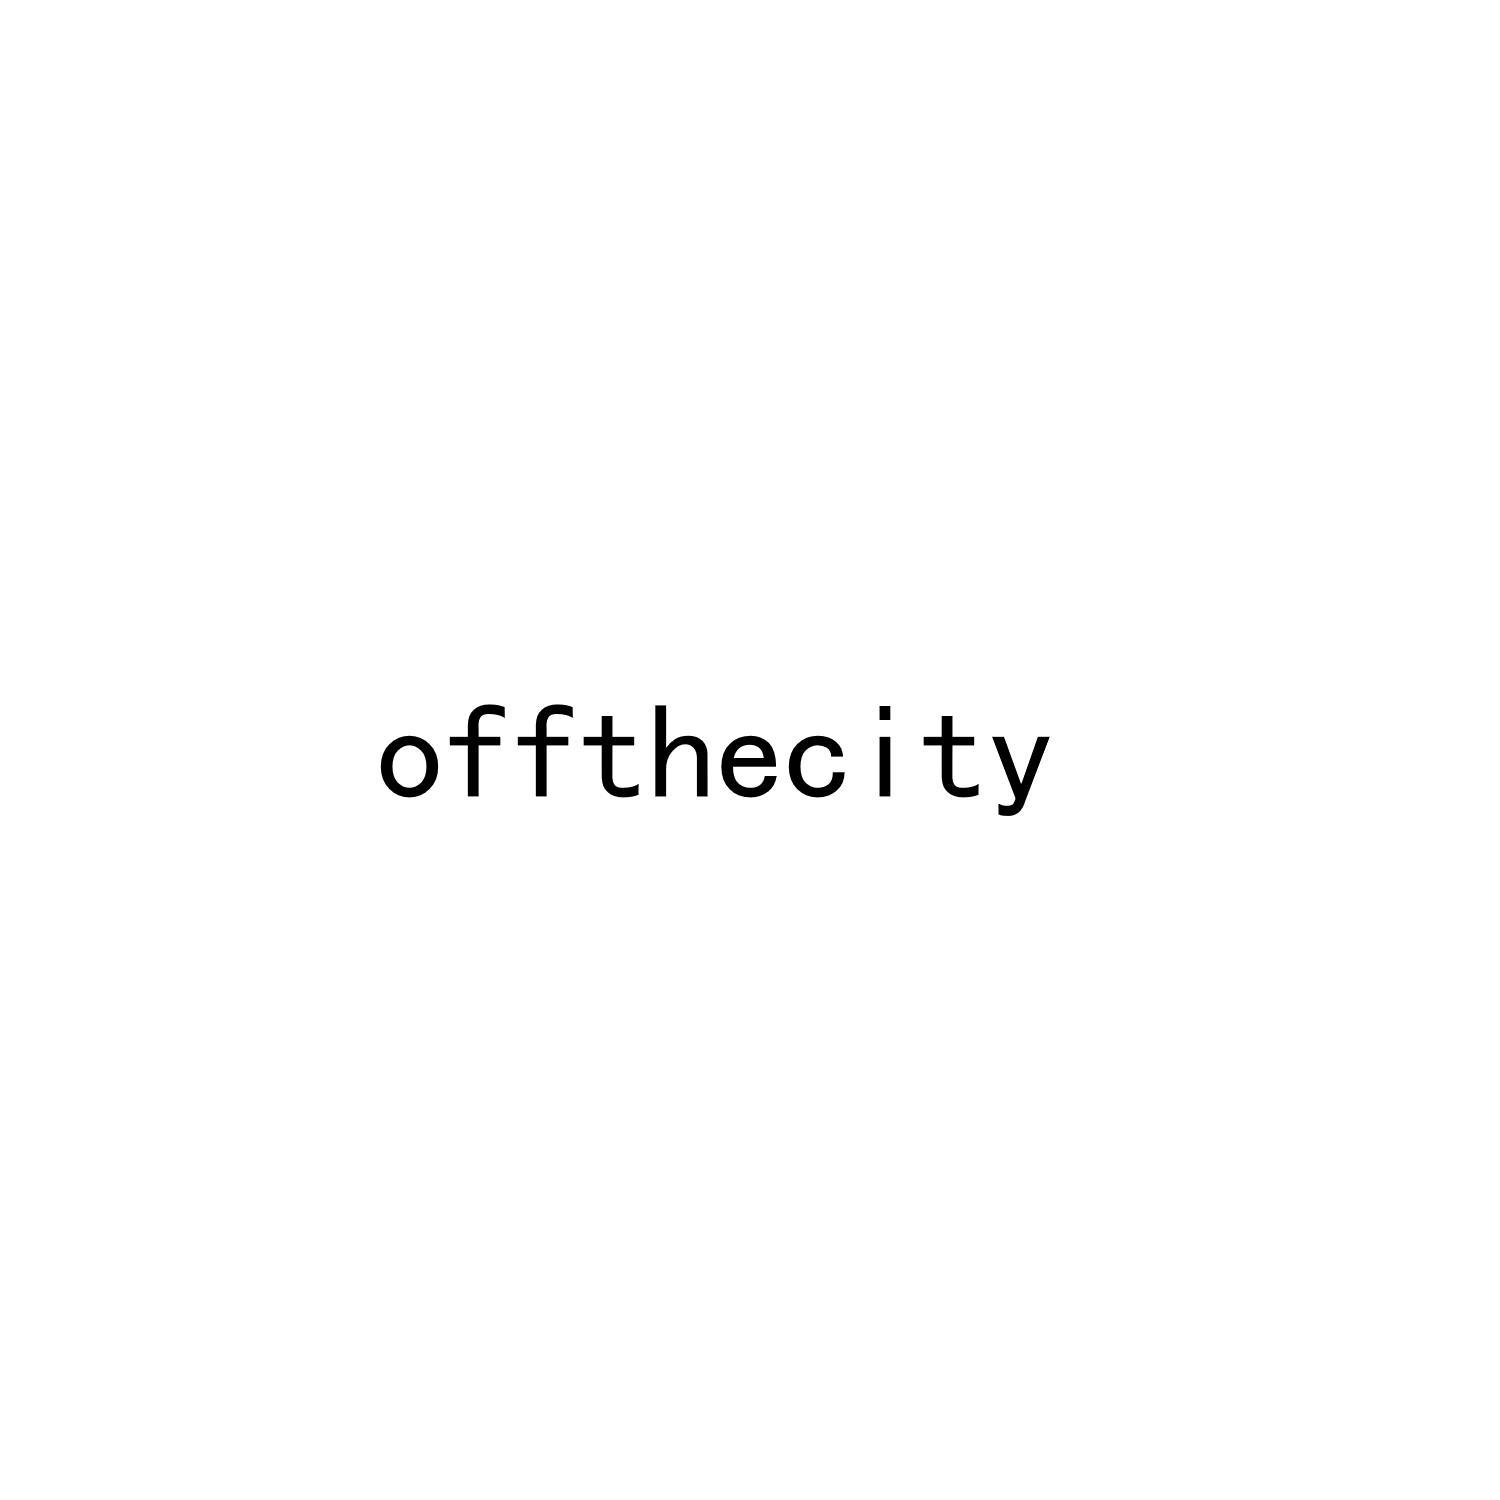 OFFTHECITY